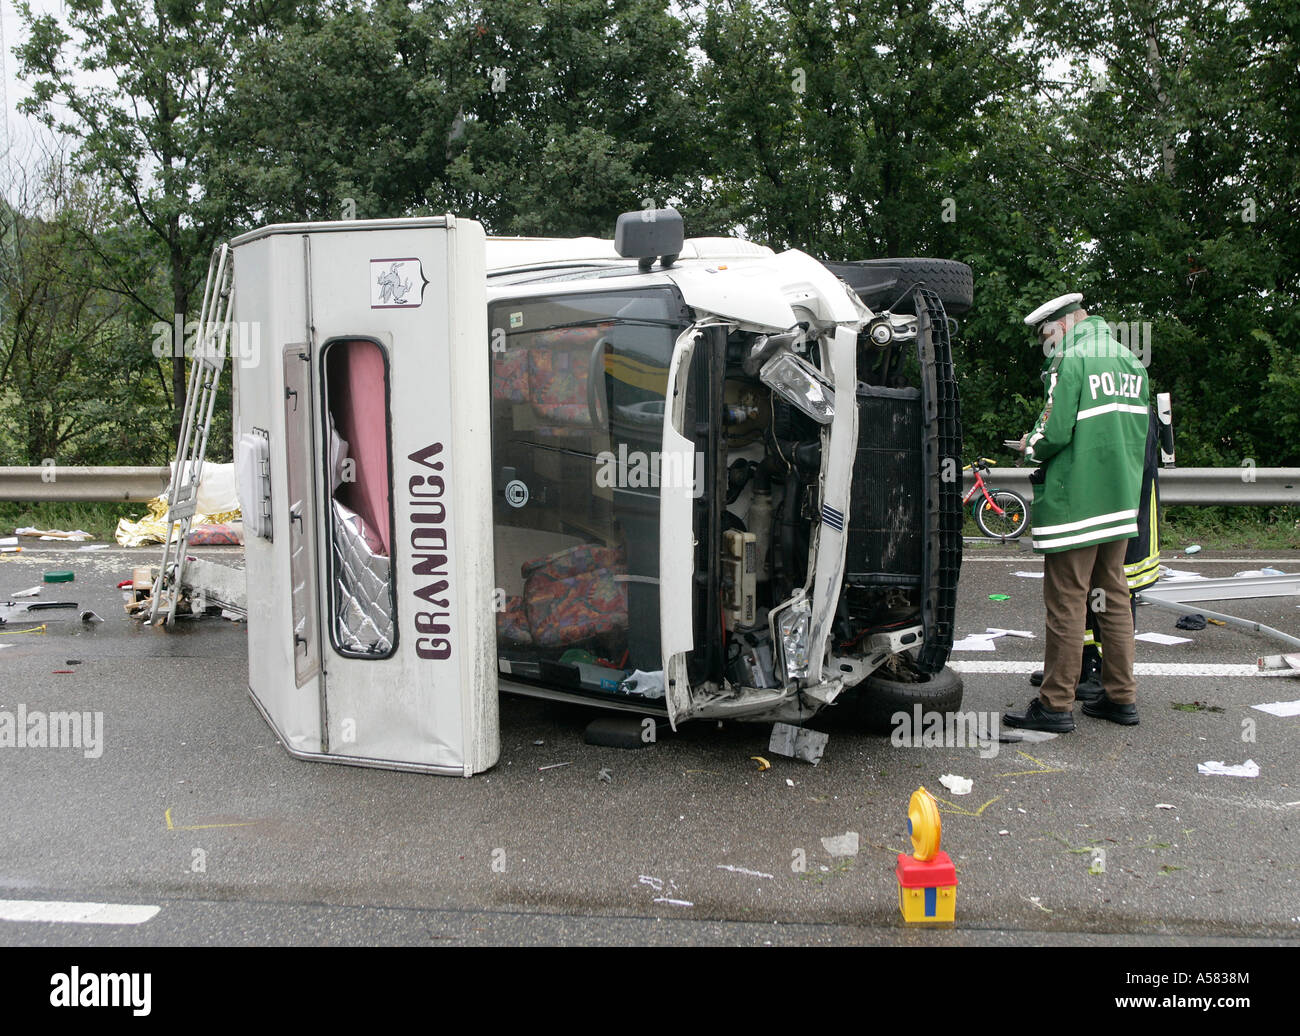 A camping car has fallen over in an accident Stock Photo